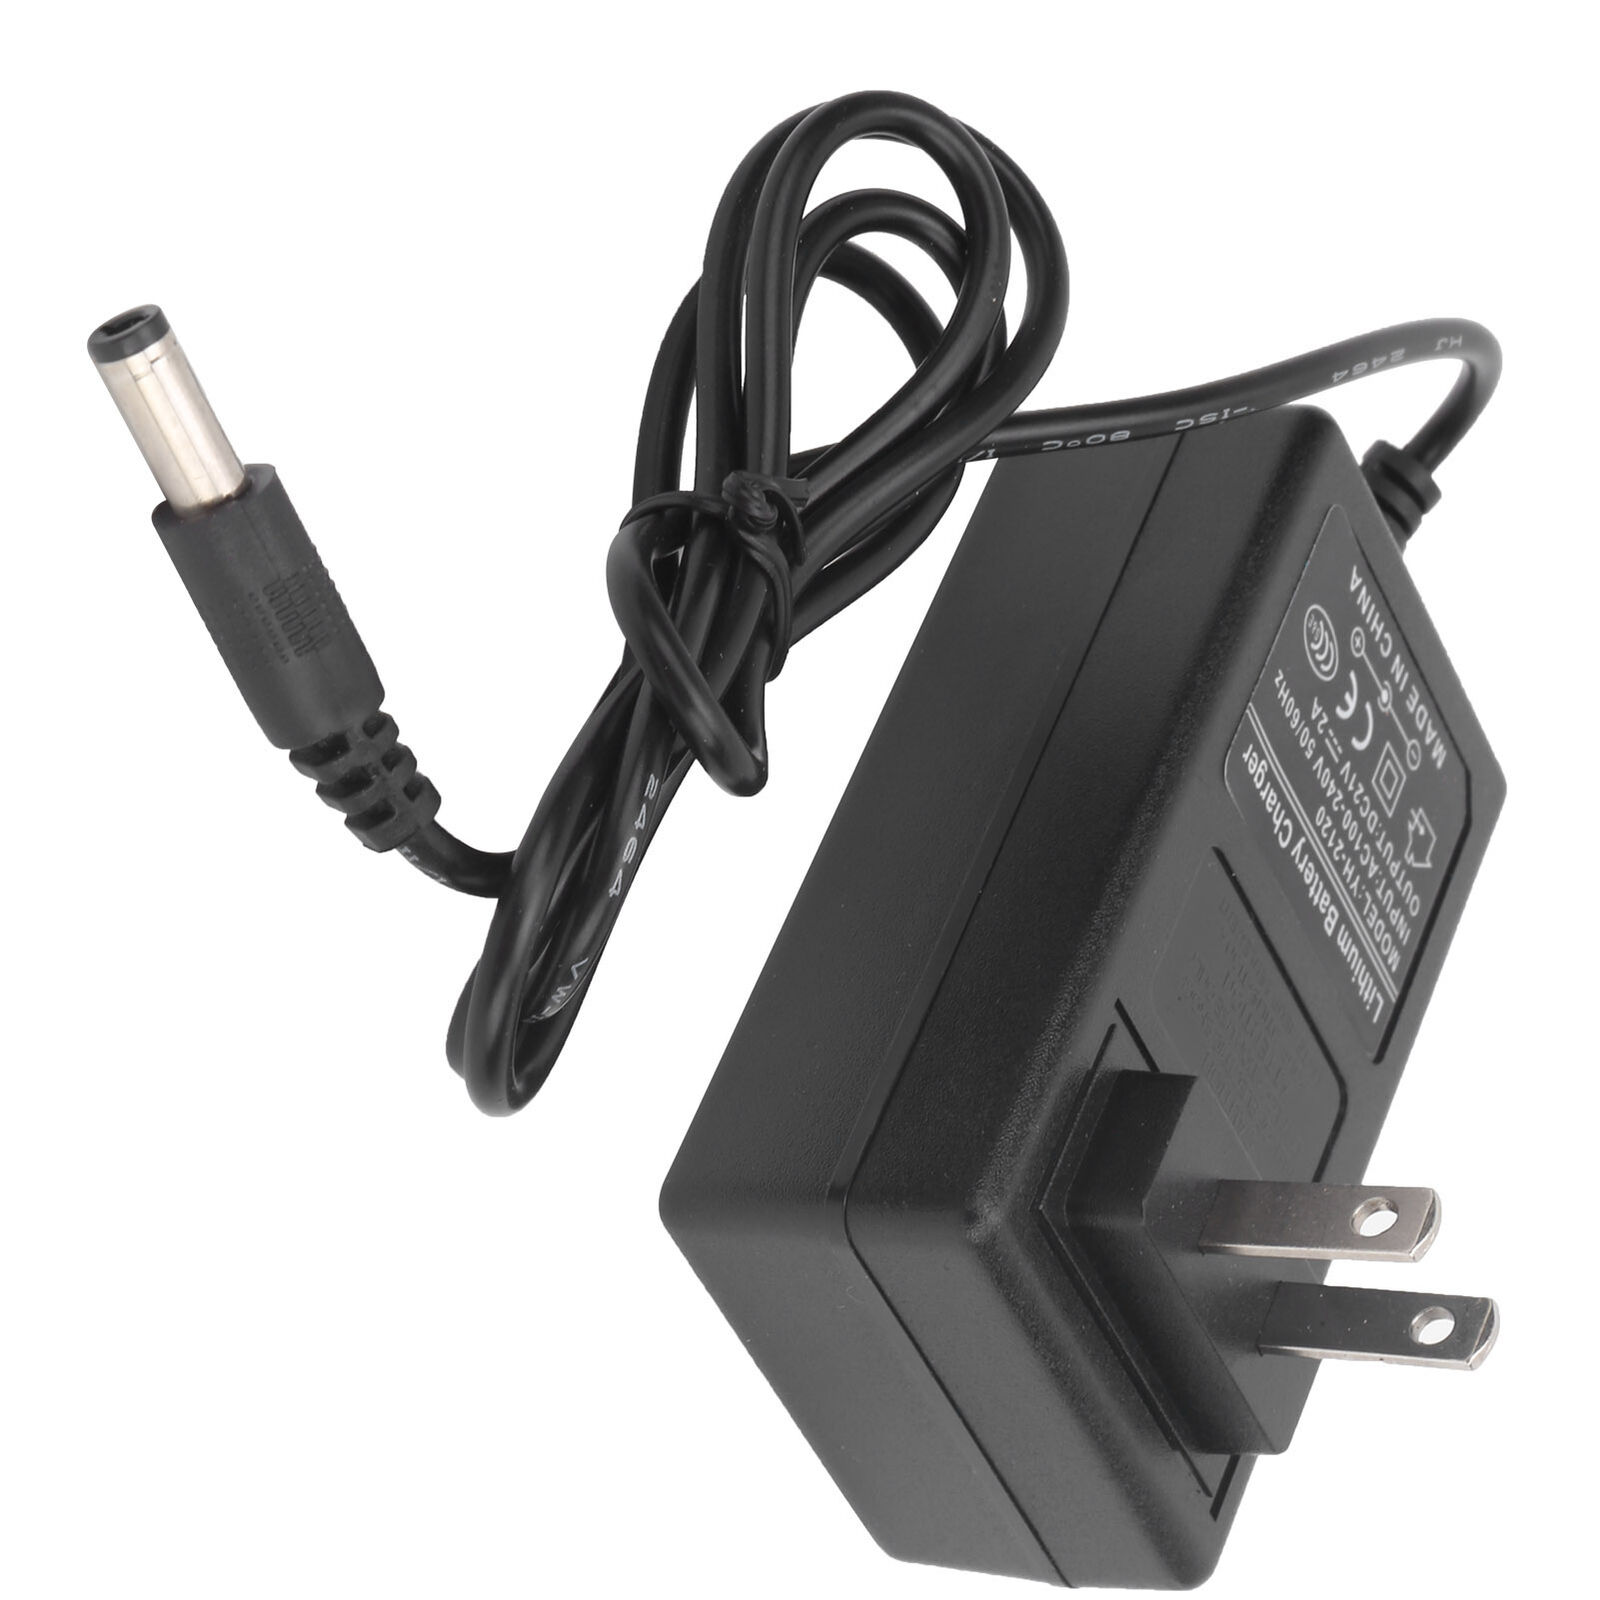 AC DC Adapter For Zoom H2 H4 H 2 4 Switching Wall Home Charger Power Supply Cord Brand Unbranded/Generic Bundled Items